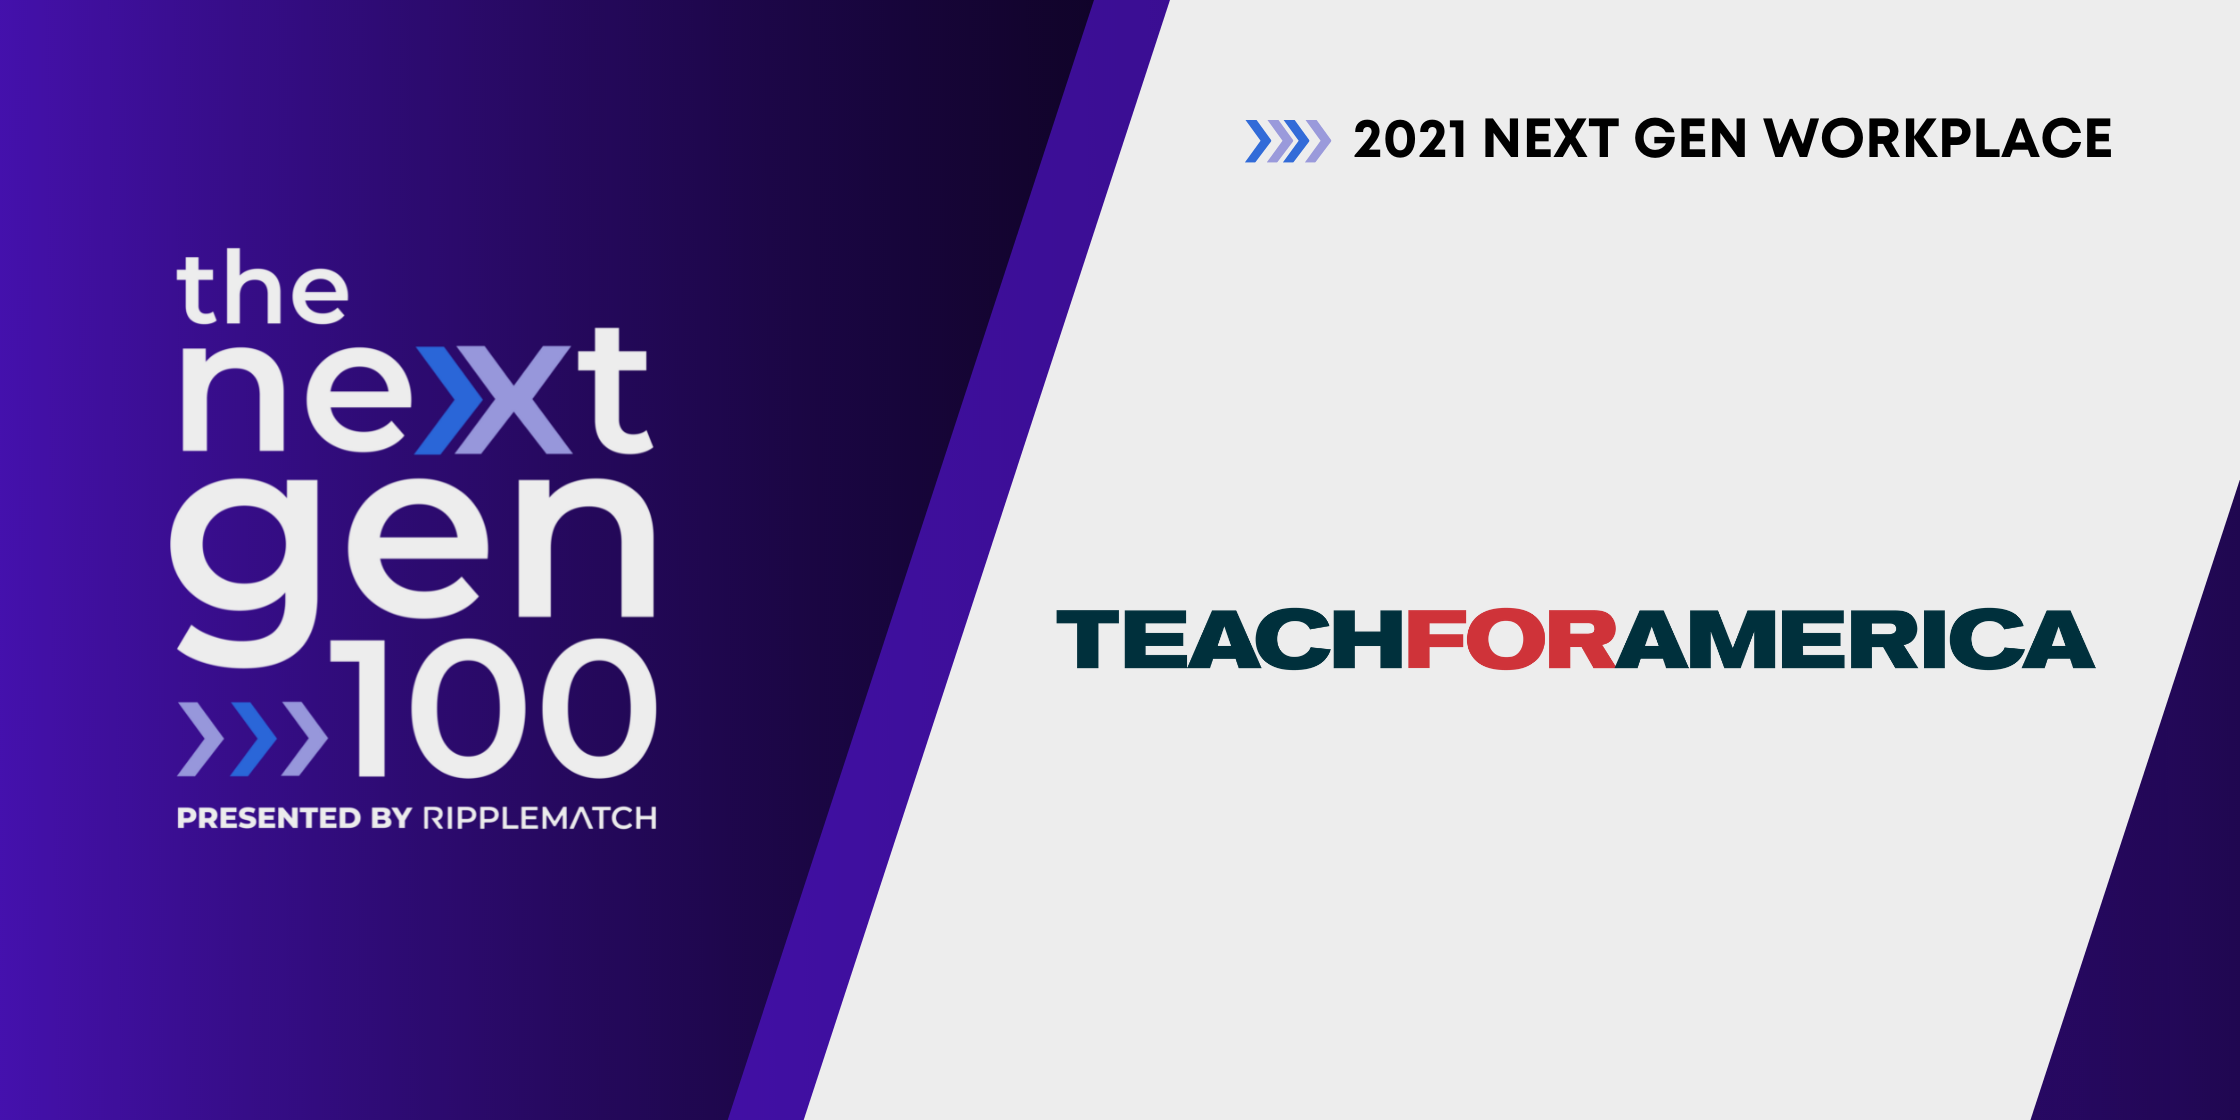 Teach For America is a Top 100 Next Gen Workplace 2021